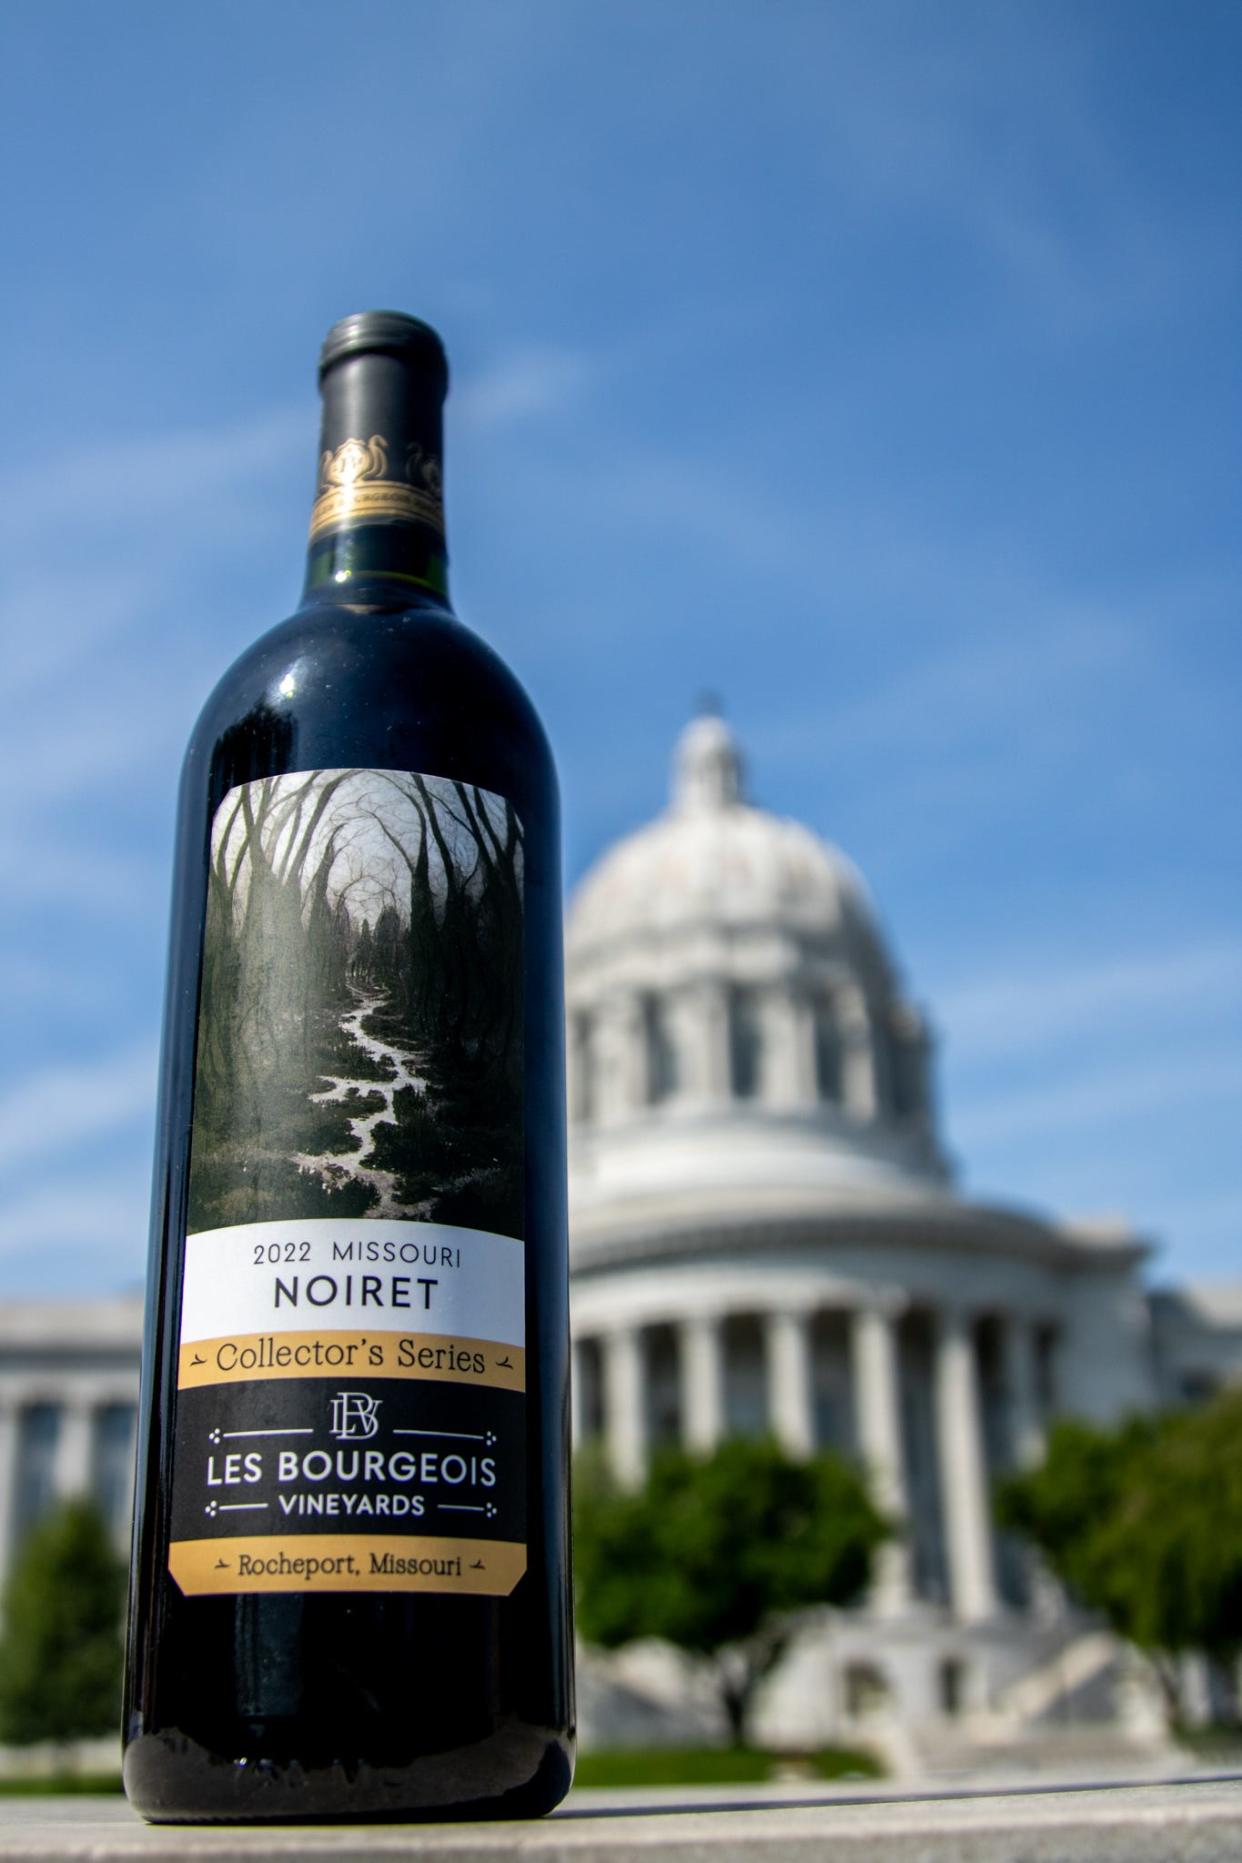 Les Bourgeois Vineyards won the contemporary label award for its Collector’s Series: 2022 Noiret at the 2023 Missouri Wine Competition.